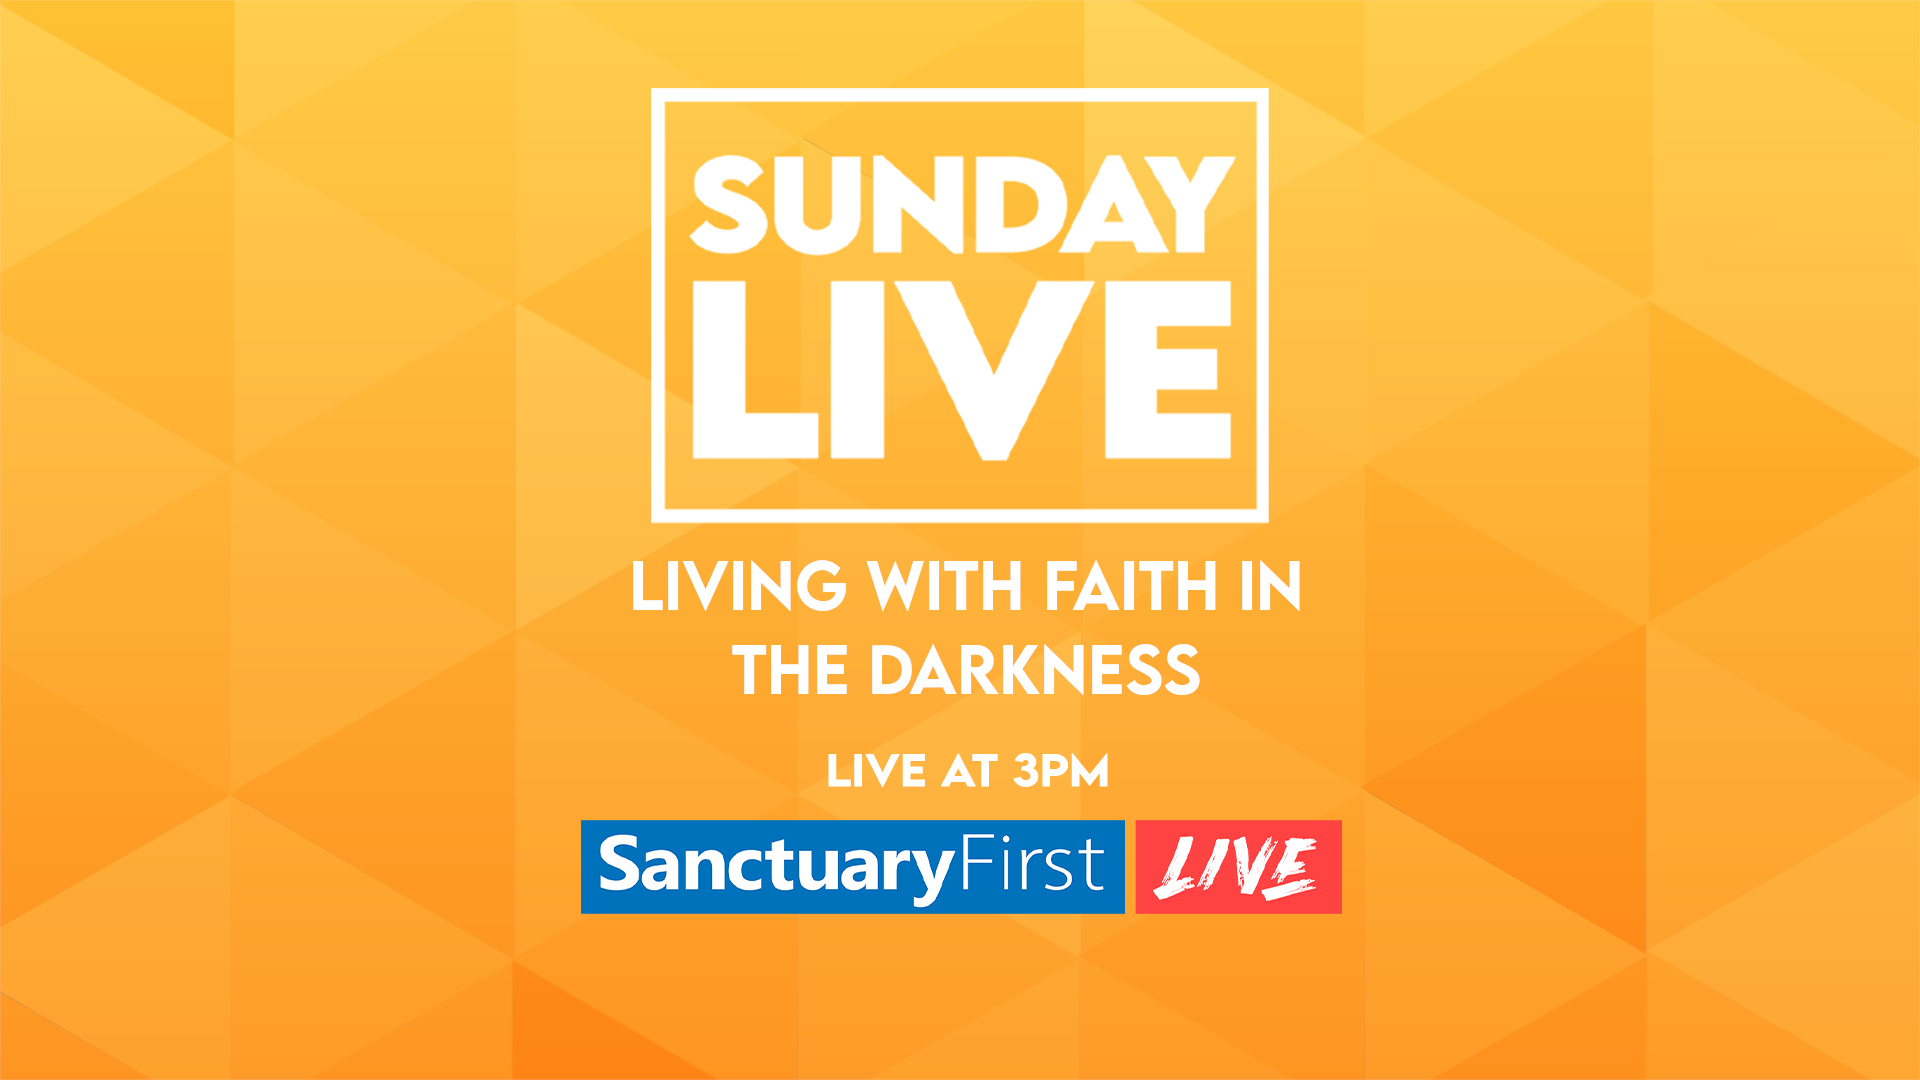 Sunday Live - Living with faith in the darkness